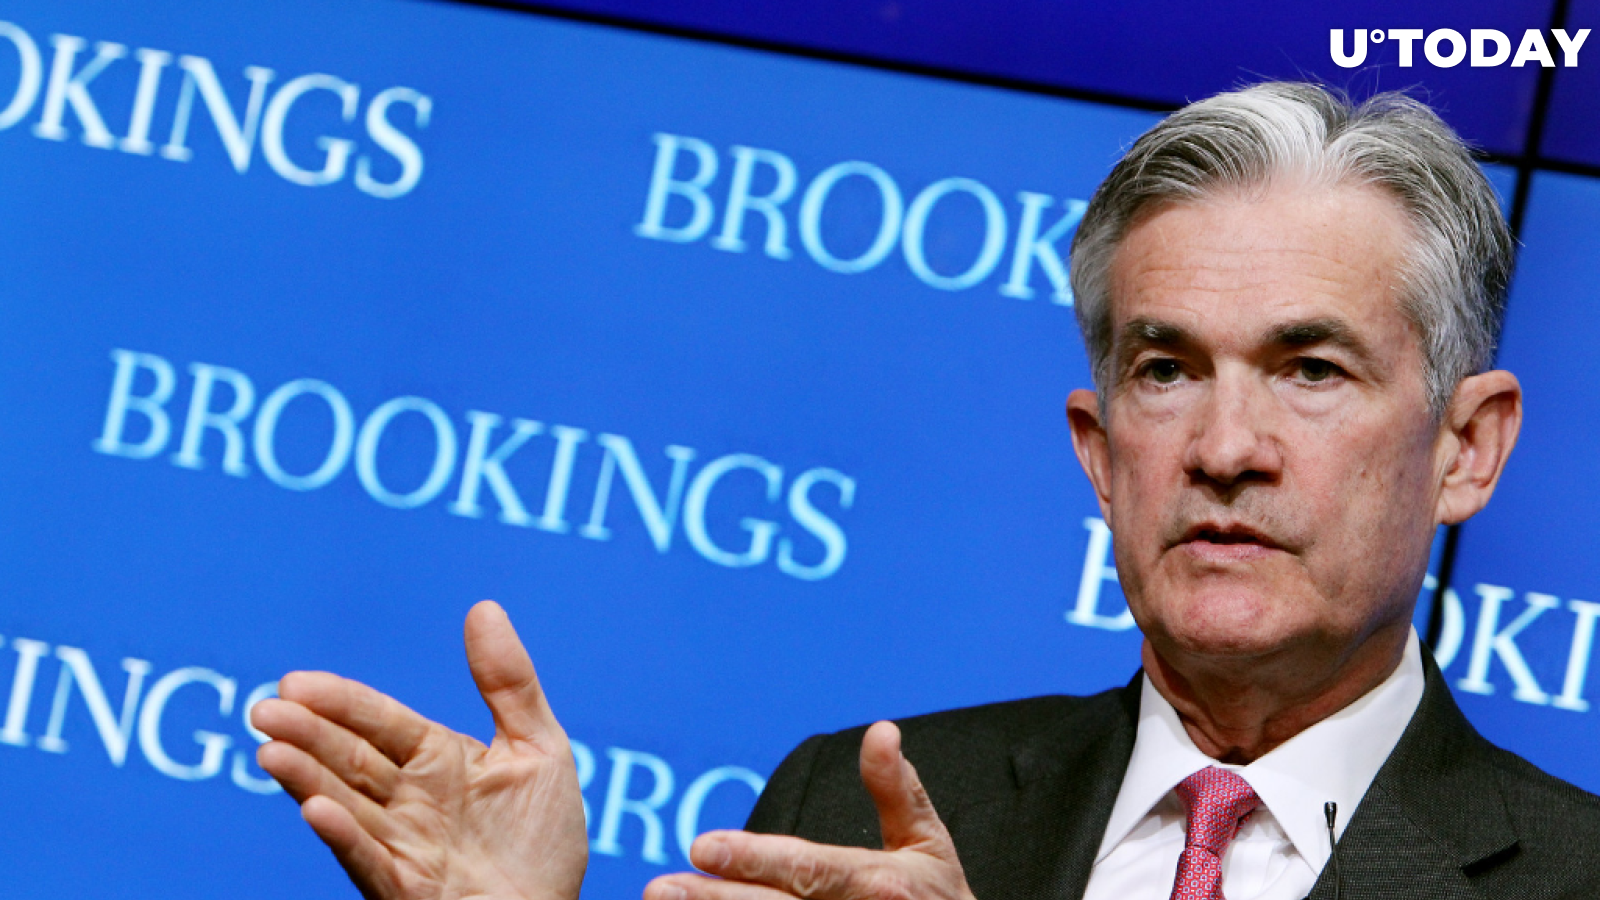 Fed Chair Says Cryptocurrencies "Completely Failed" to Become Payment Mechanism